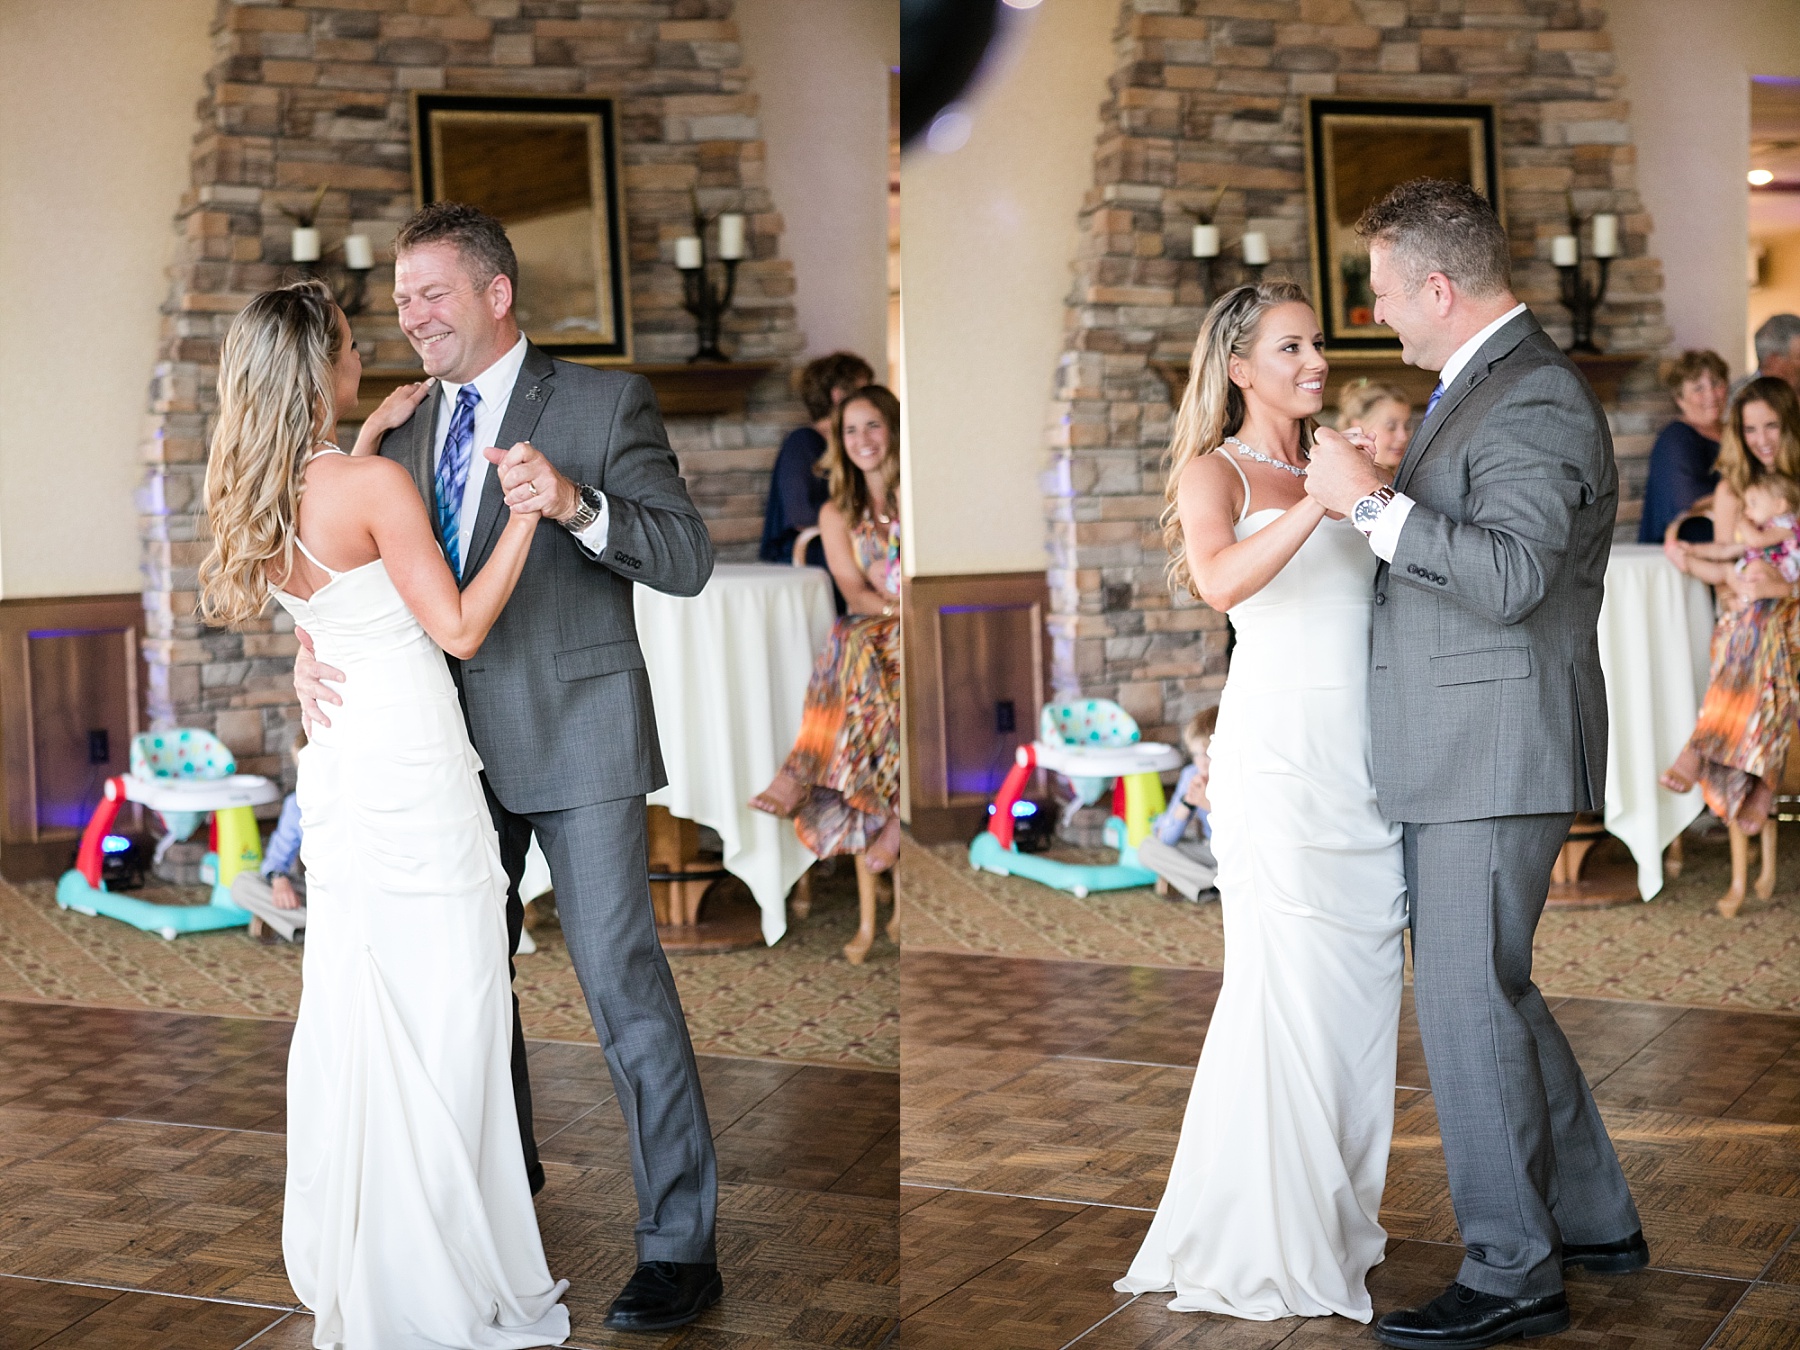 They met in the break room at work, and it was love at first sight for Brittany & Jim.  